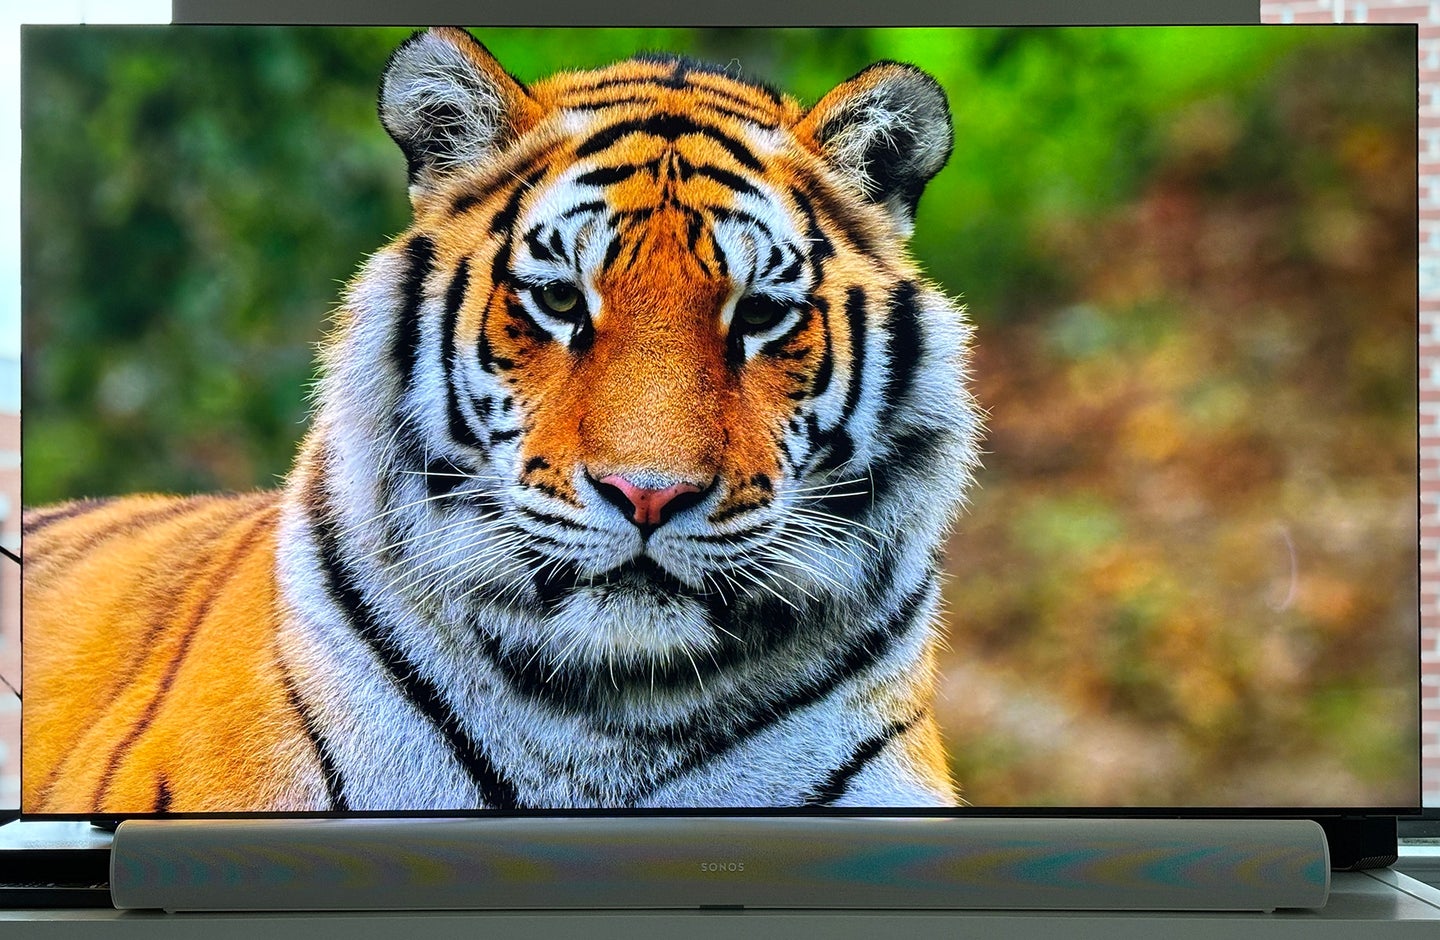 A tiger can't change its stripes, and the essential character of this Samsung QN900C Neo QLED 8K TV is lifelike detail and vivid color.